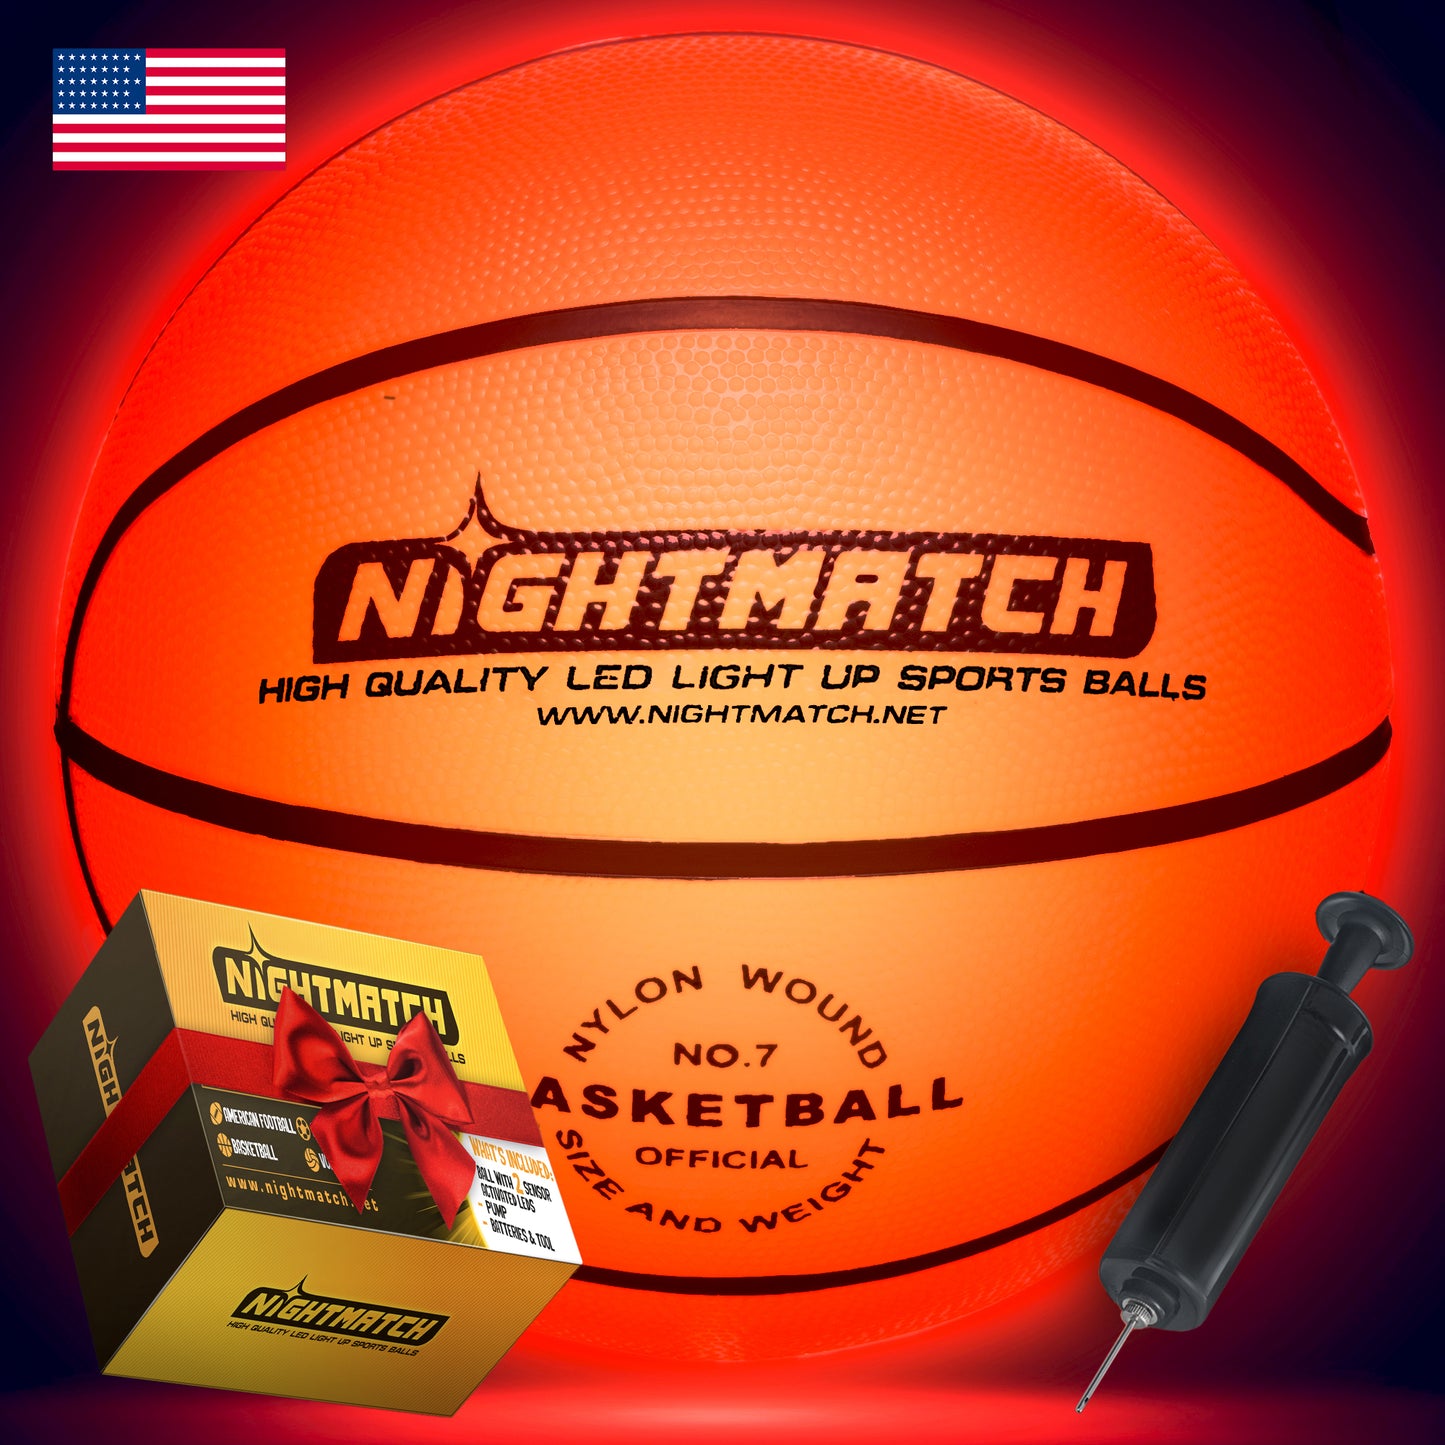 NIGHTMATCH Premium LED Light Up Basketball - Perfect Glow in The Dark Basketball Size 7 with 2 LEDs, 8 Batteries & 1 Pump